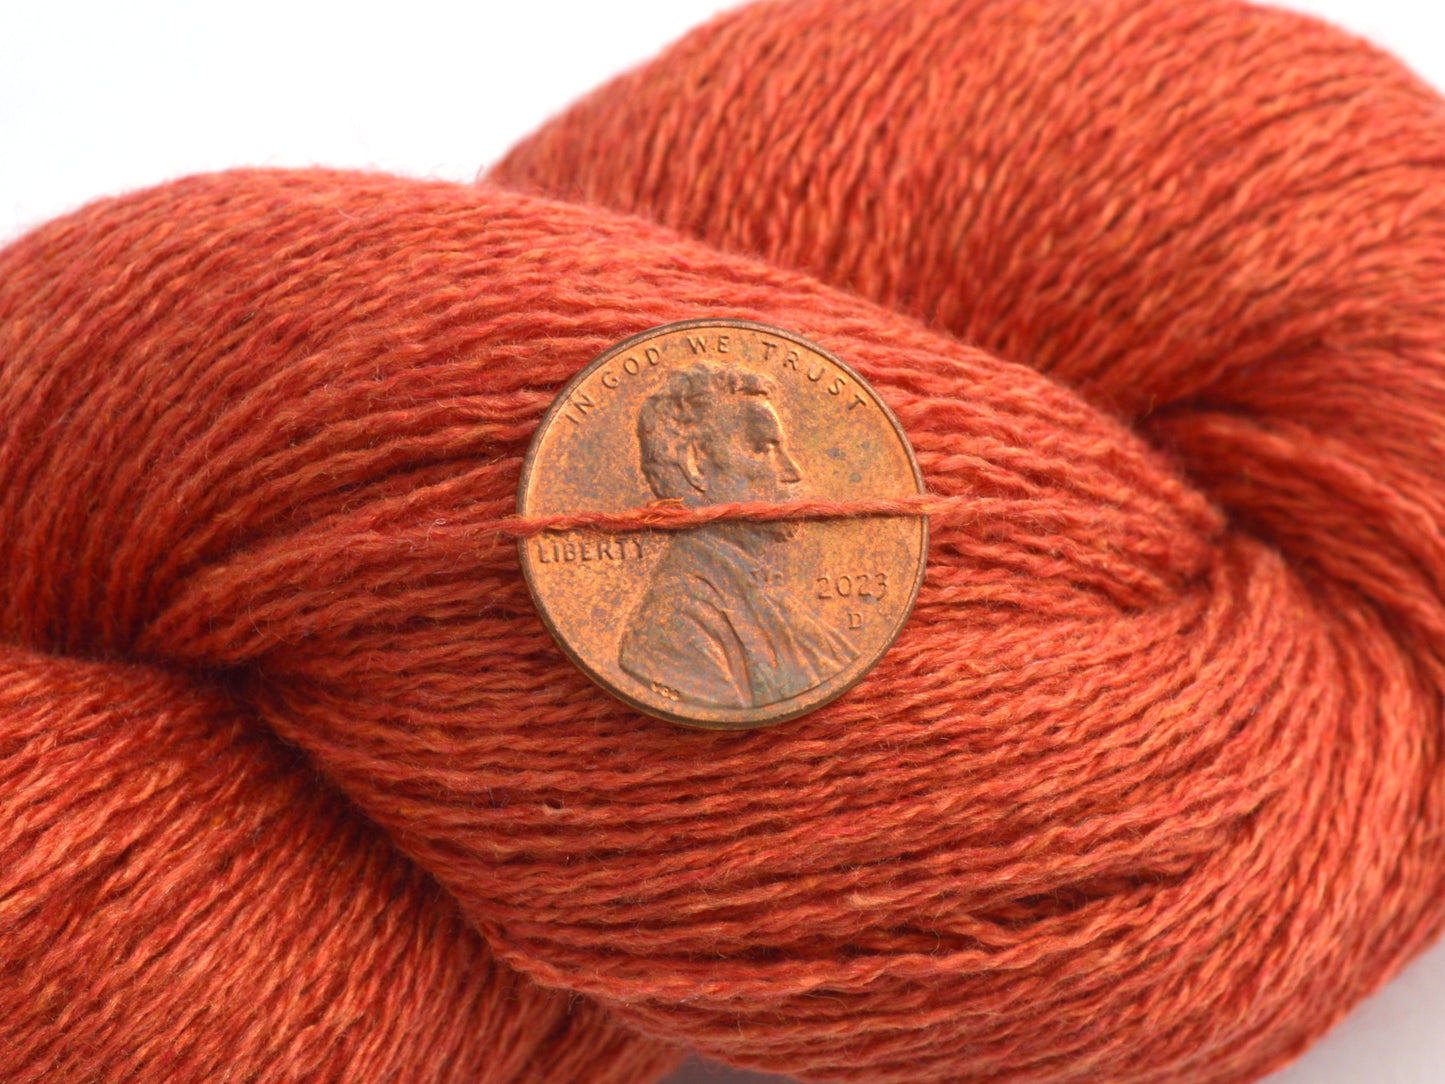 Lace Weight Recycled Silk Cashmere Yarn in Terracotta